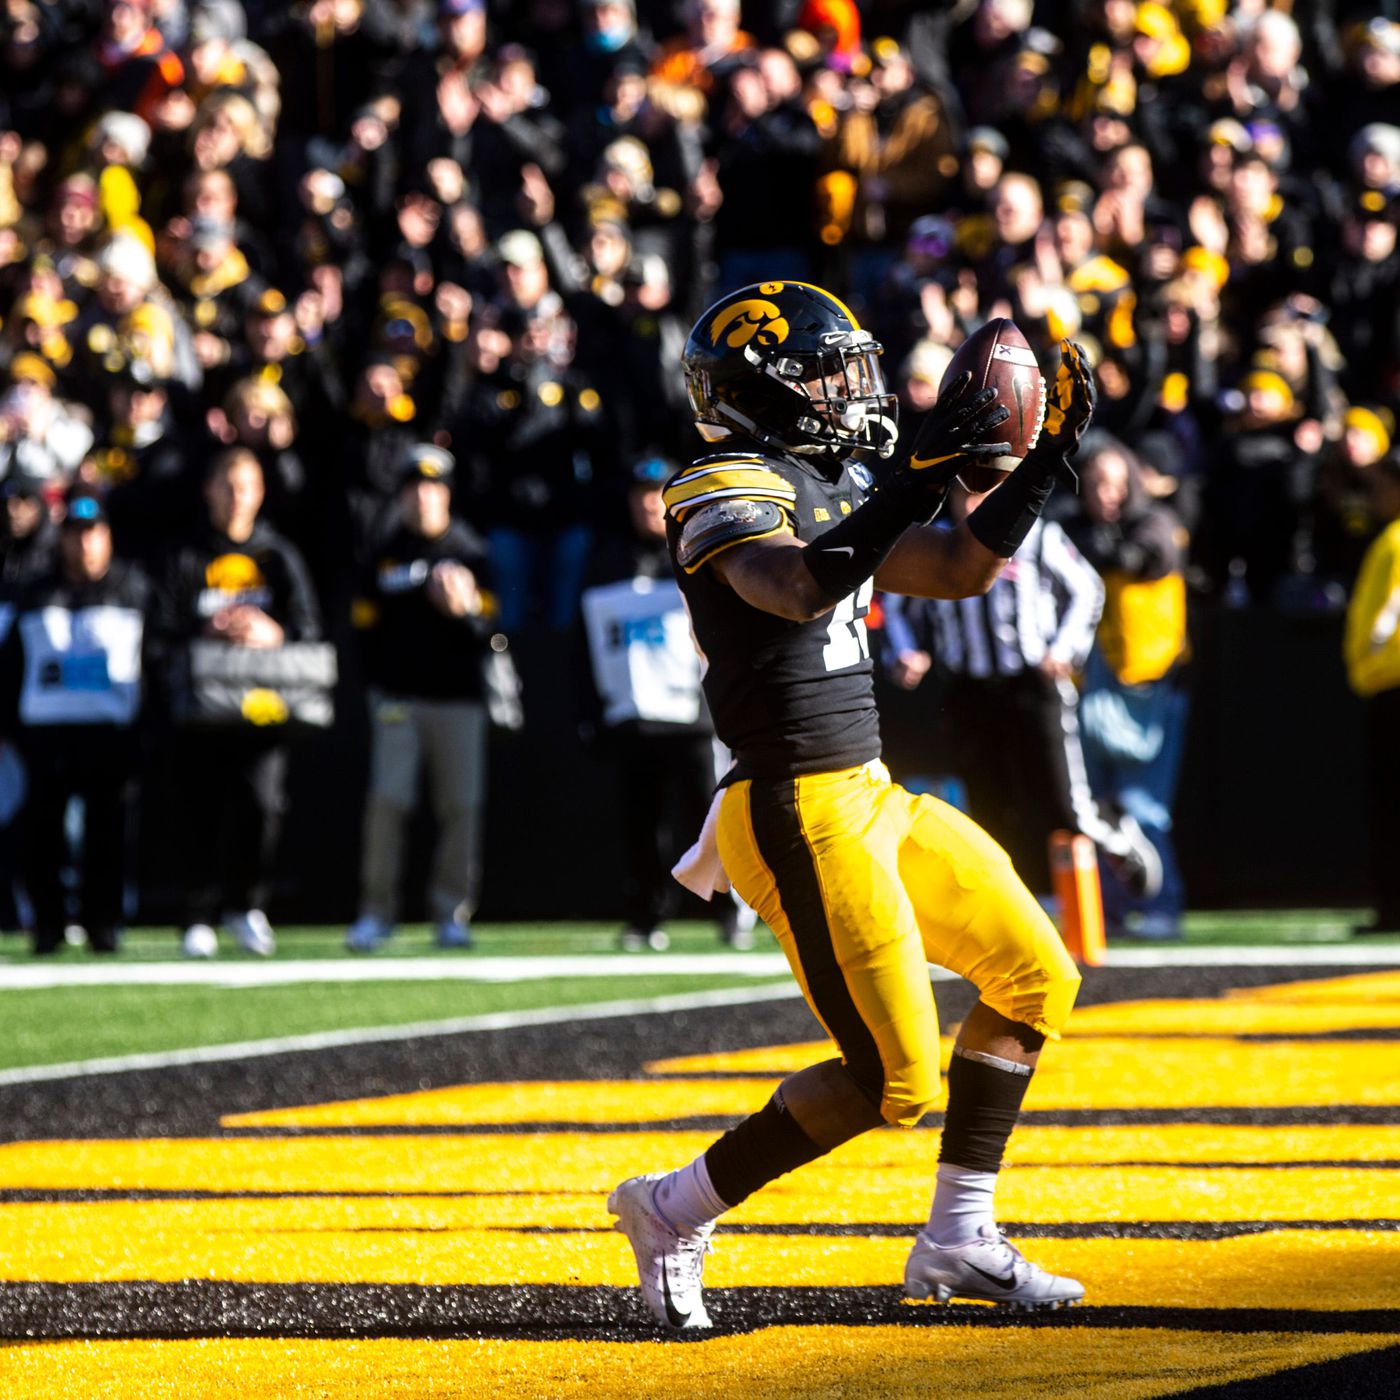 Iowa Football: What is YOUR prediction for the 2021 season? Heart Gold Pants